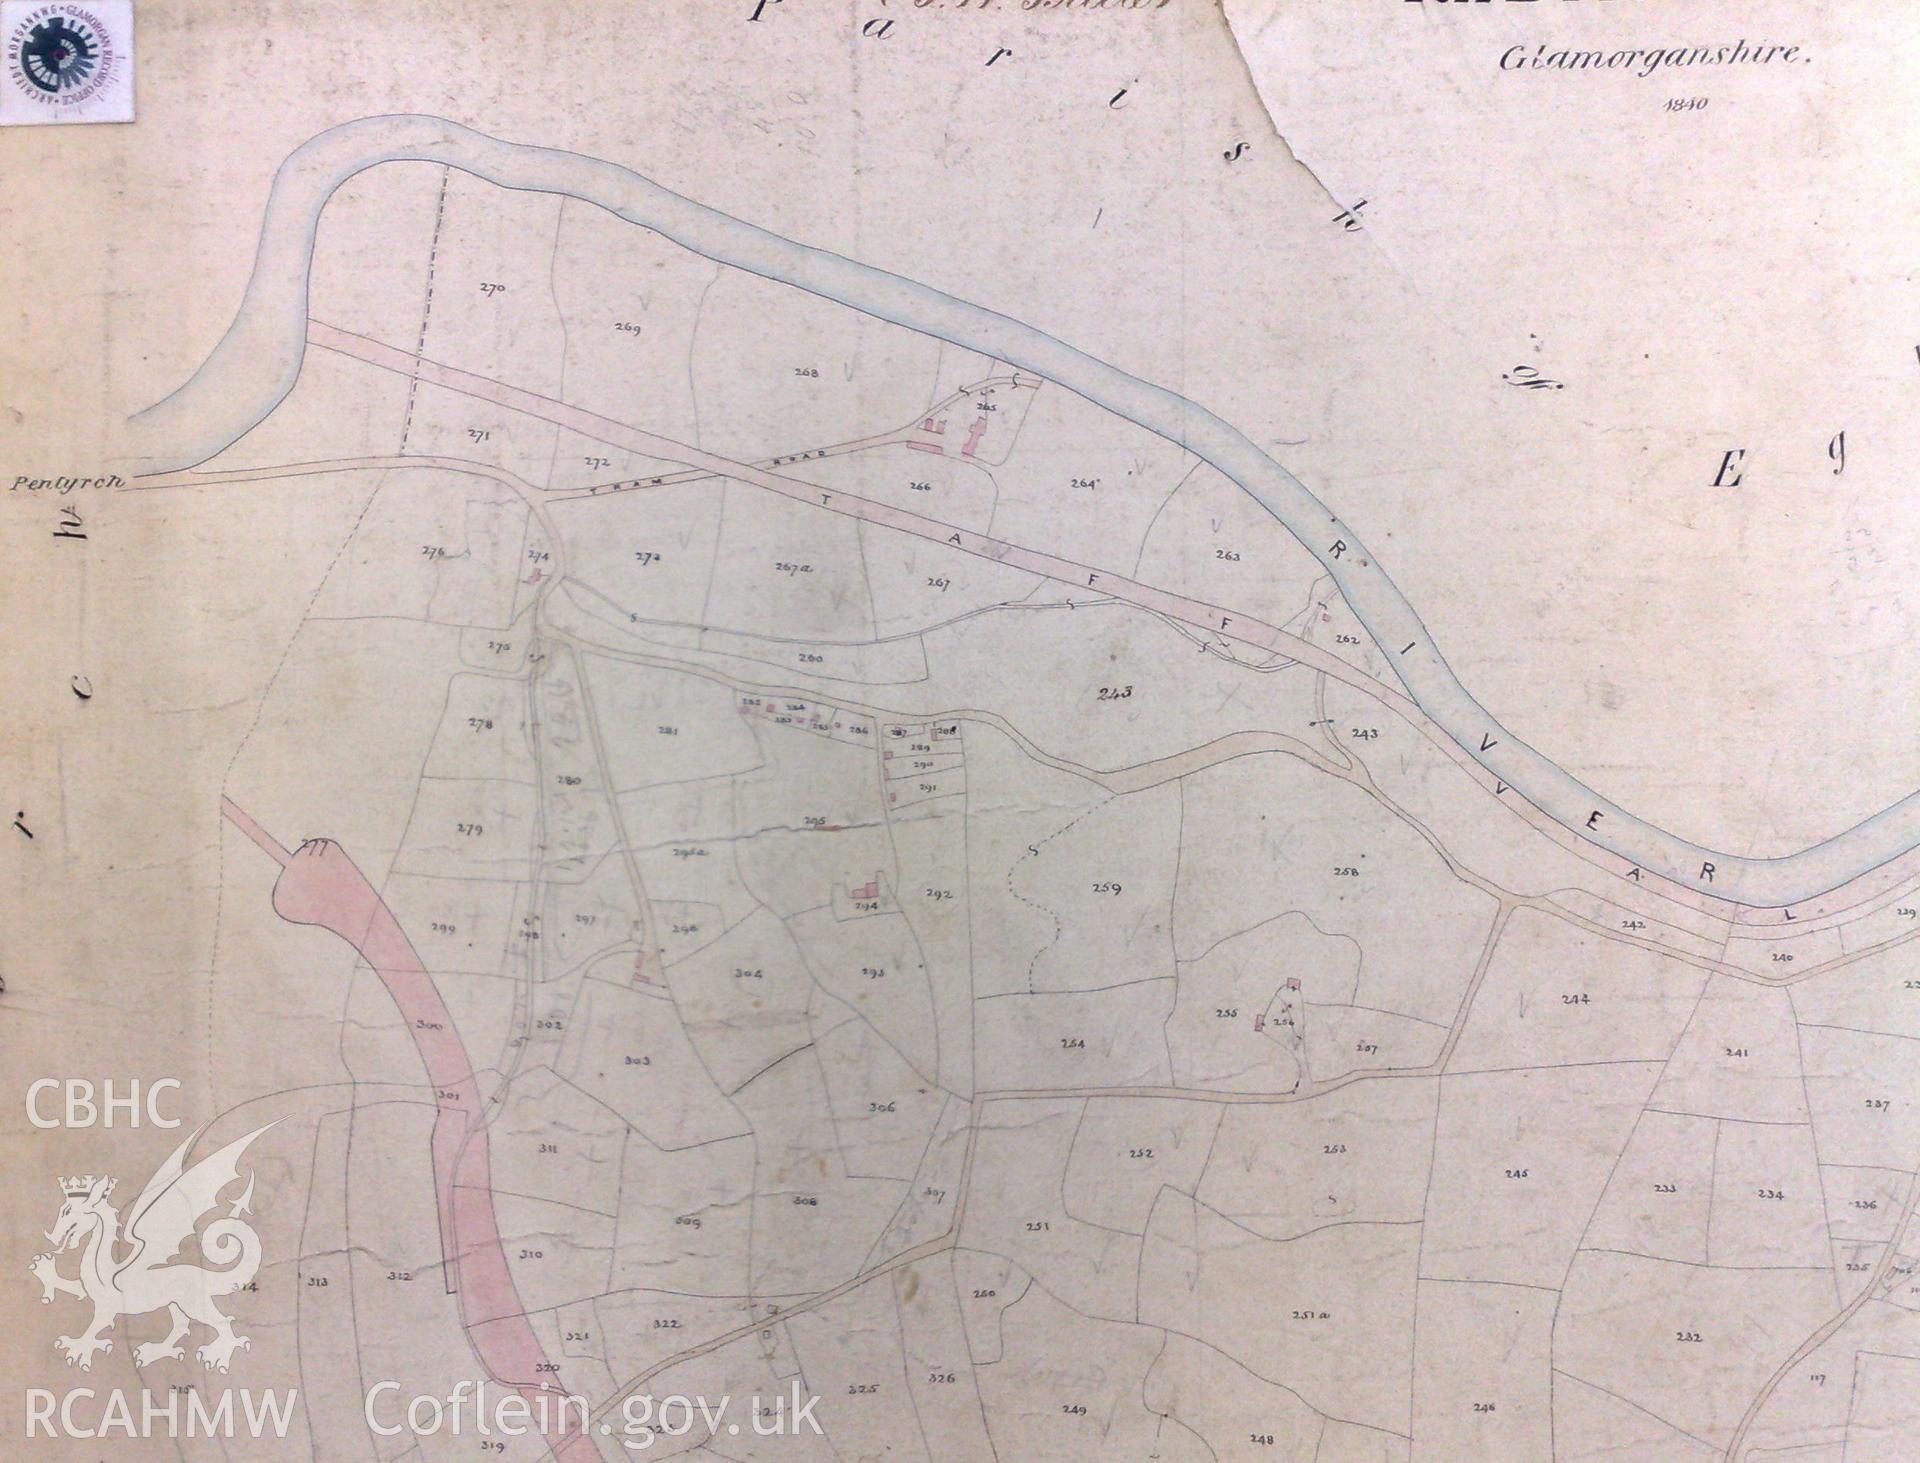 Digital image of part of 1840 tithe map showing Morganstown Motte, Radyr. From a Cambrian Archaeological Projects assessment survey by Dr Amelia Pannett (CAP Report 592).